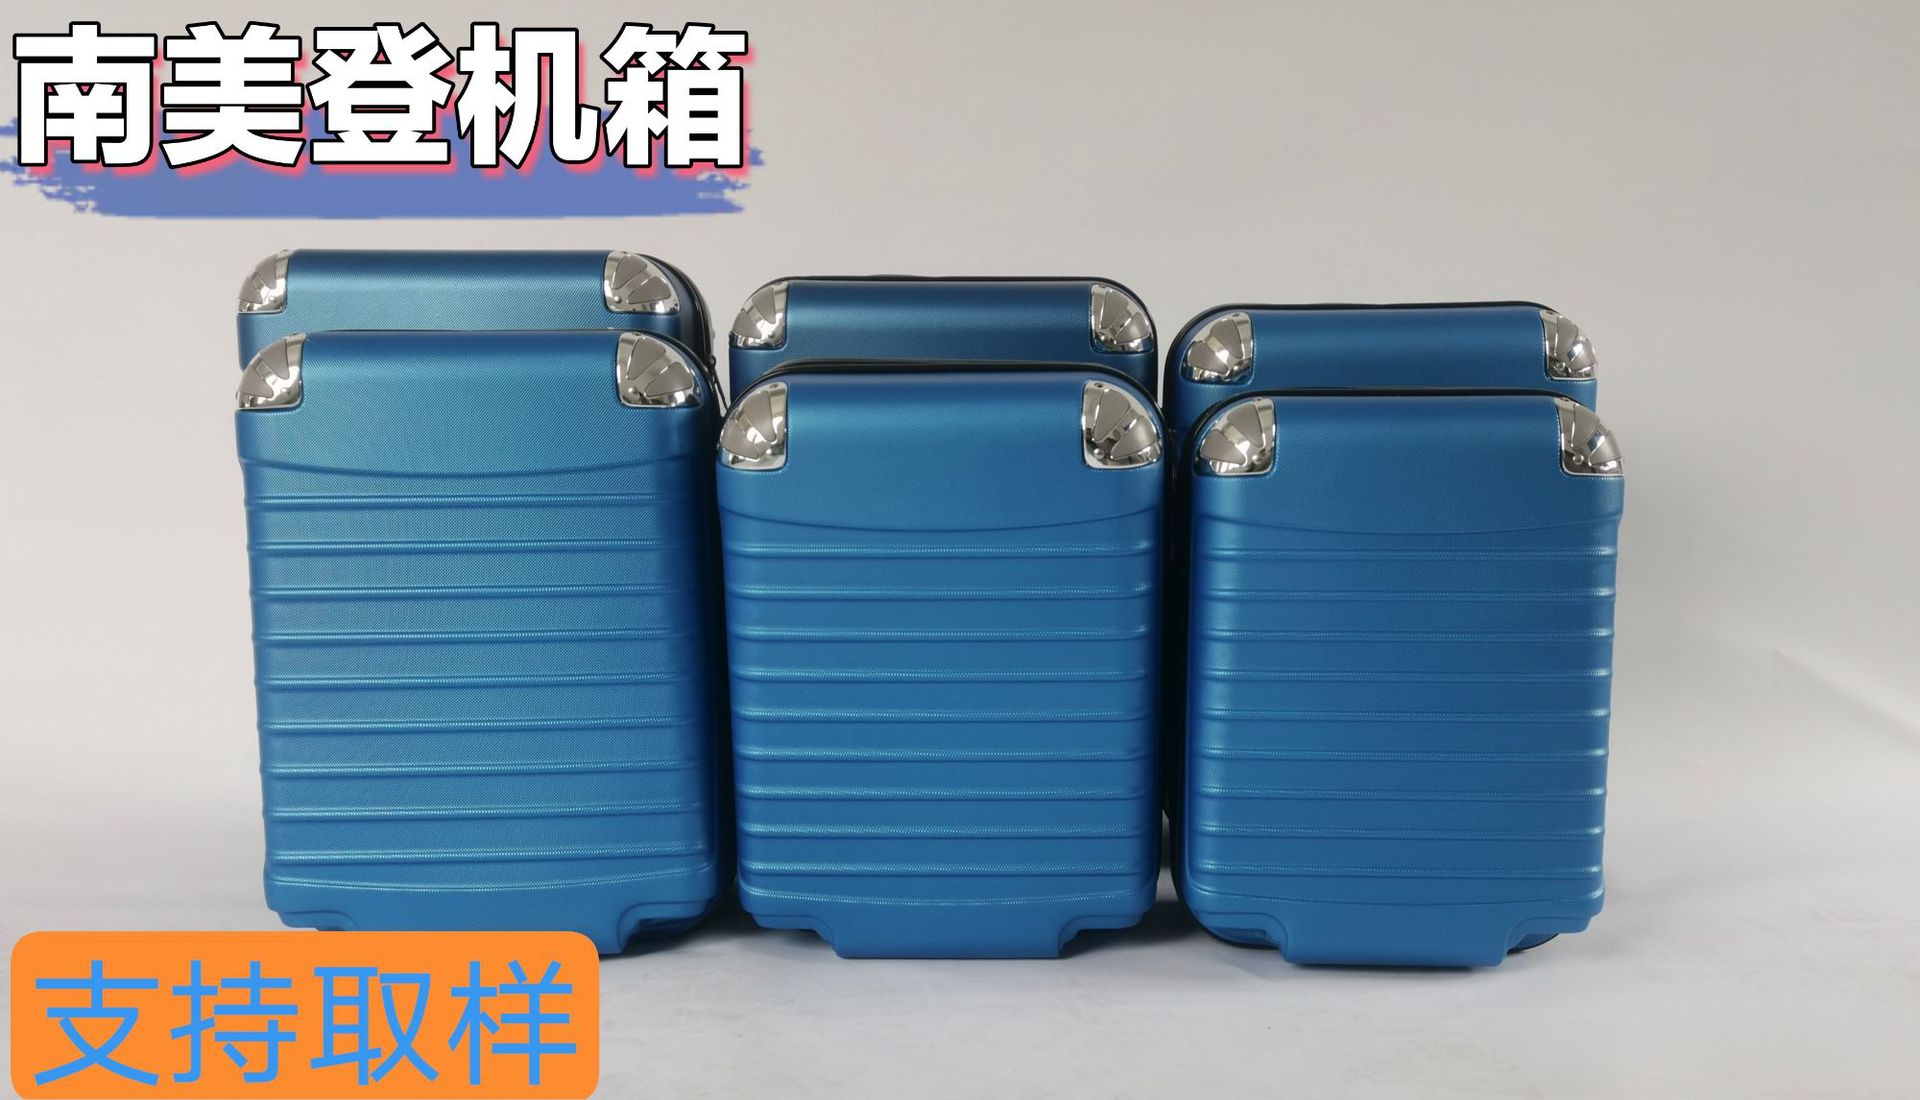 2022 New Brazil Special for Small 5-Piece ABS Pp Semi-Finished Trolley Case Luggage Travel